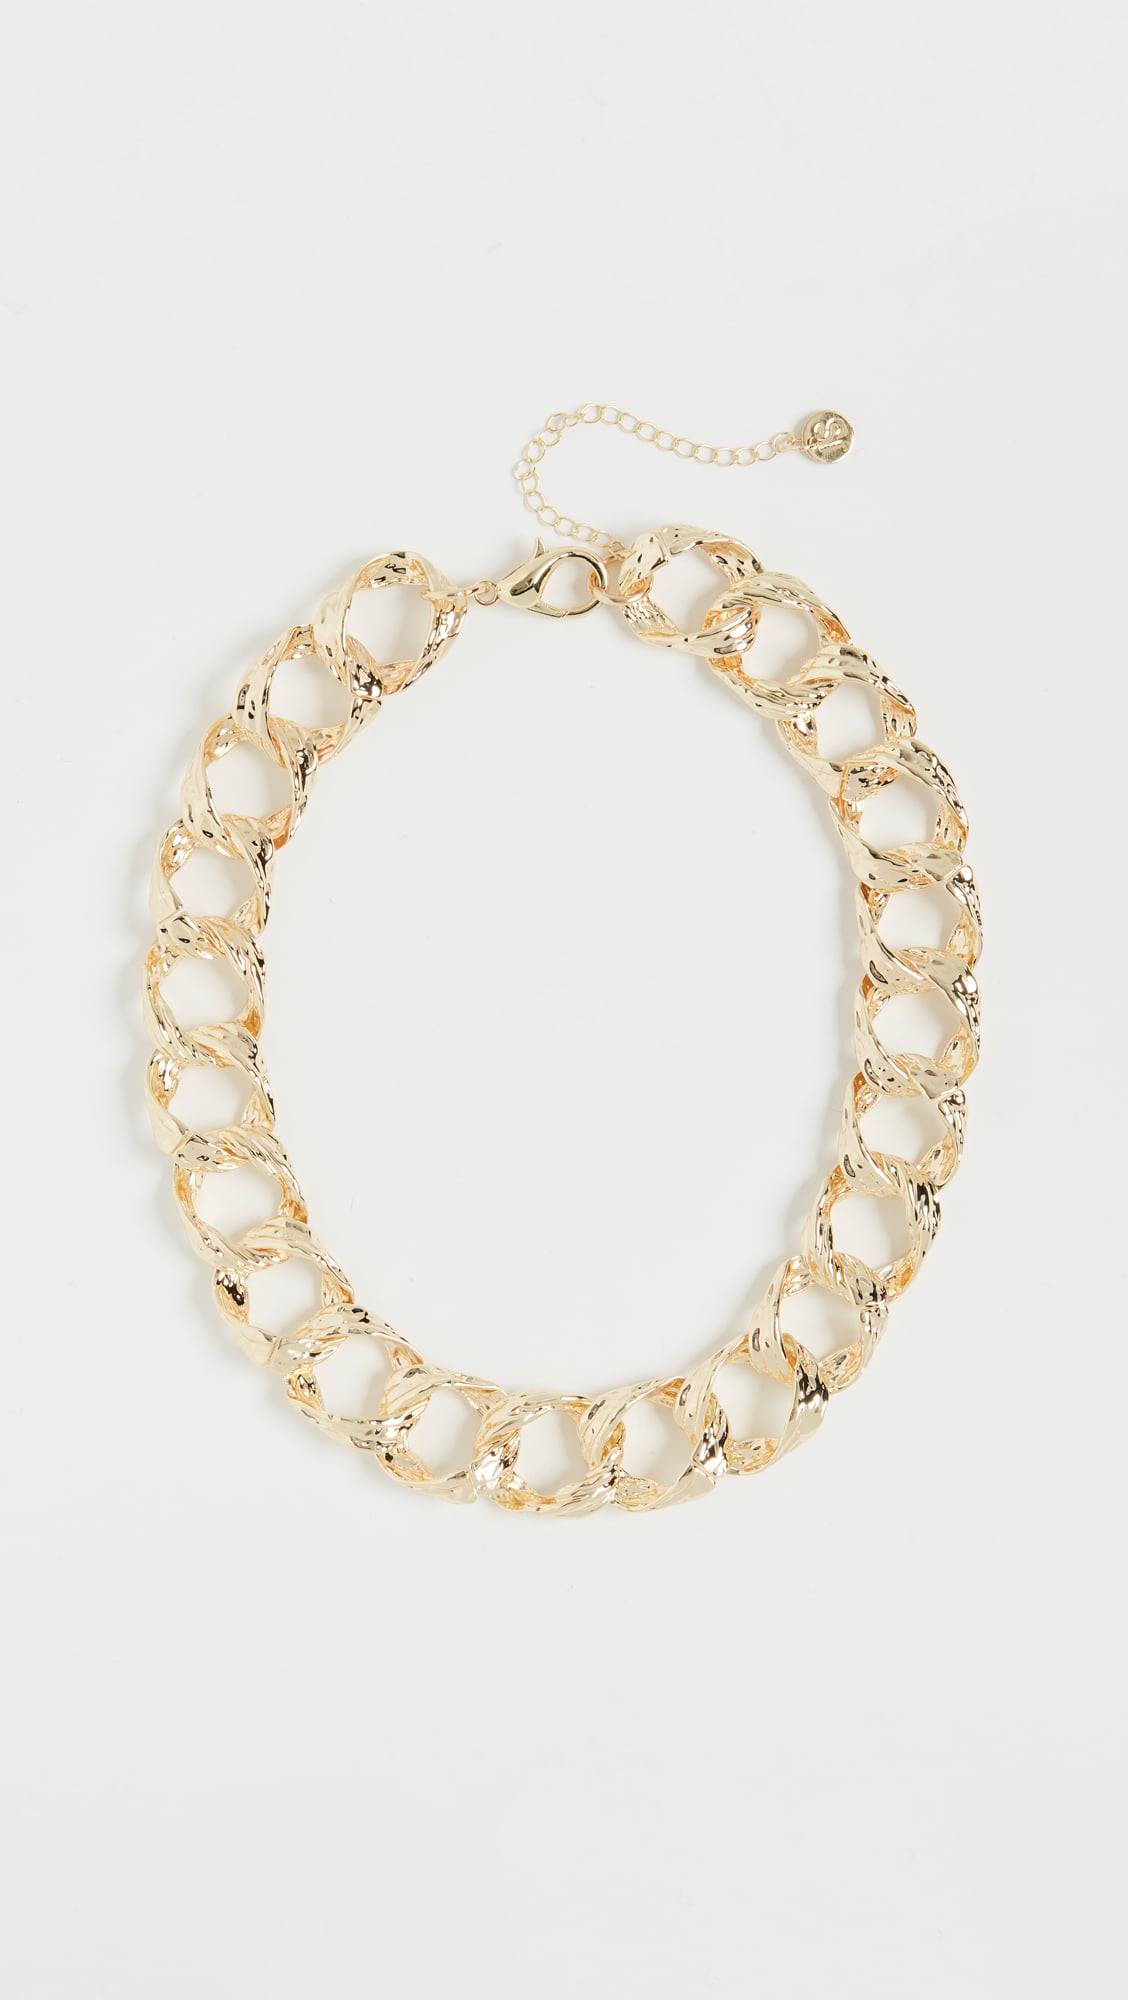 Jules Smith Vintage Textured Chain Necklace